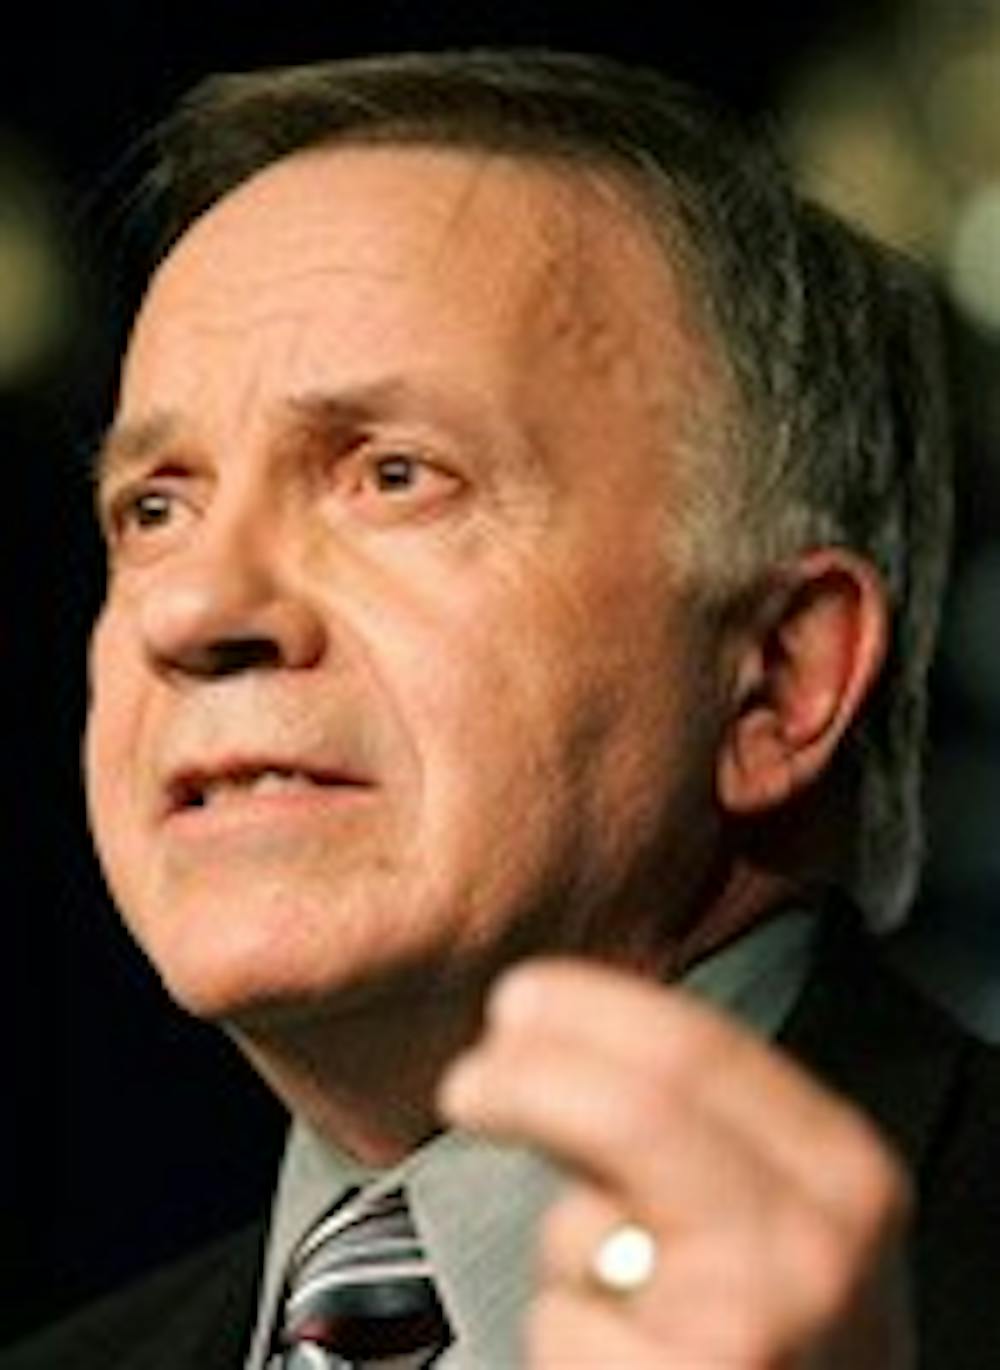 Former U.S Rep. Tom Tancredo, who opposes undocumented immigration, will speak on Monday.